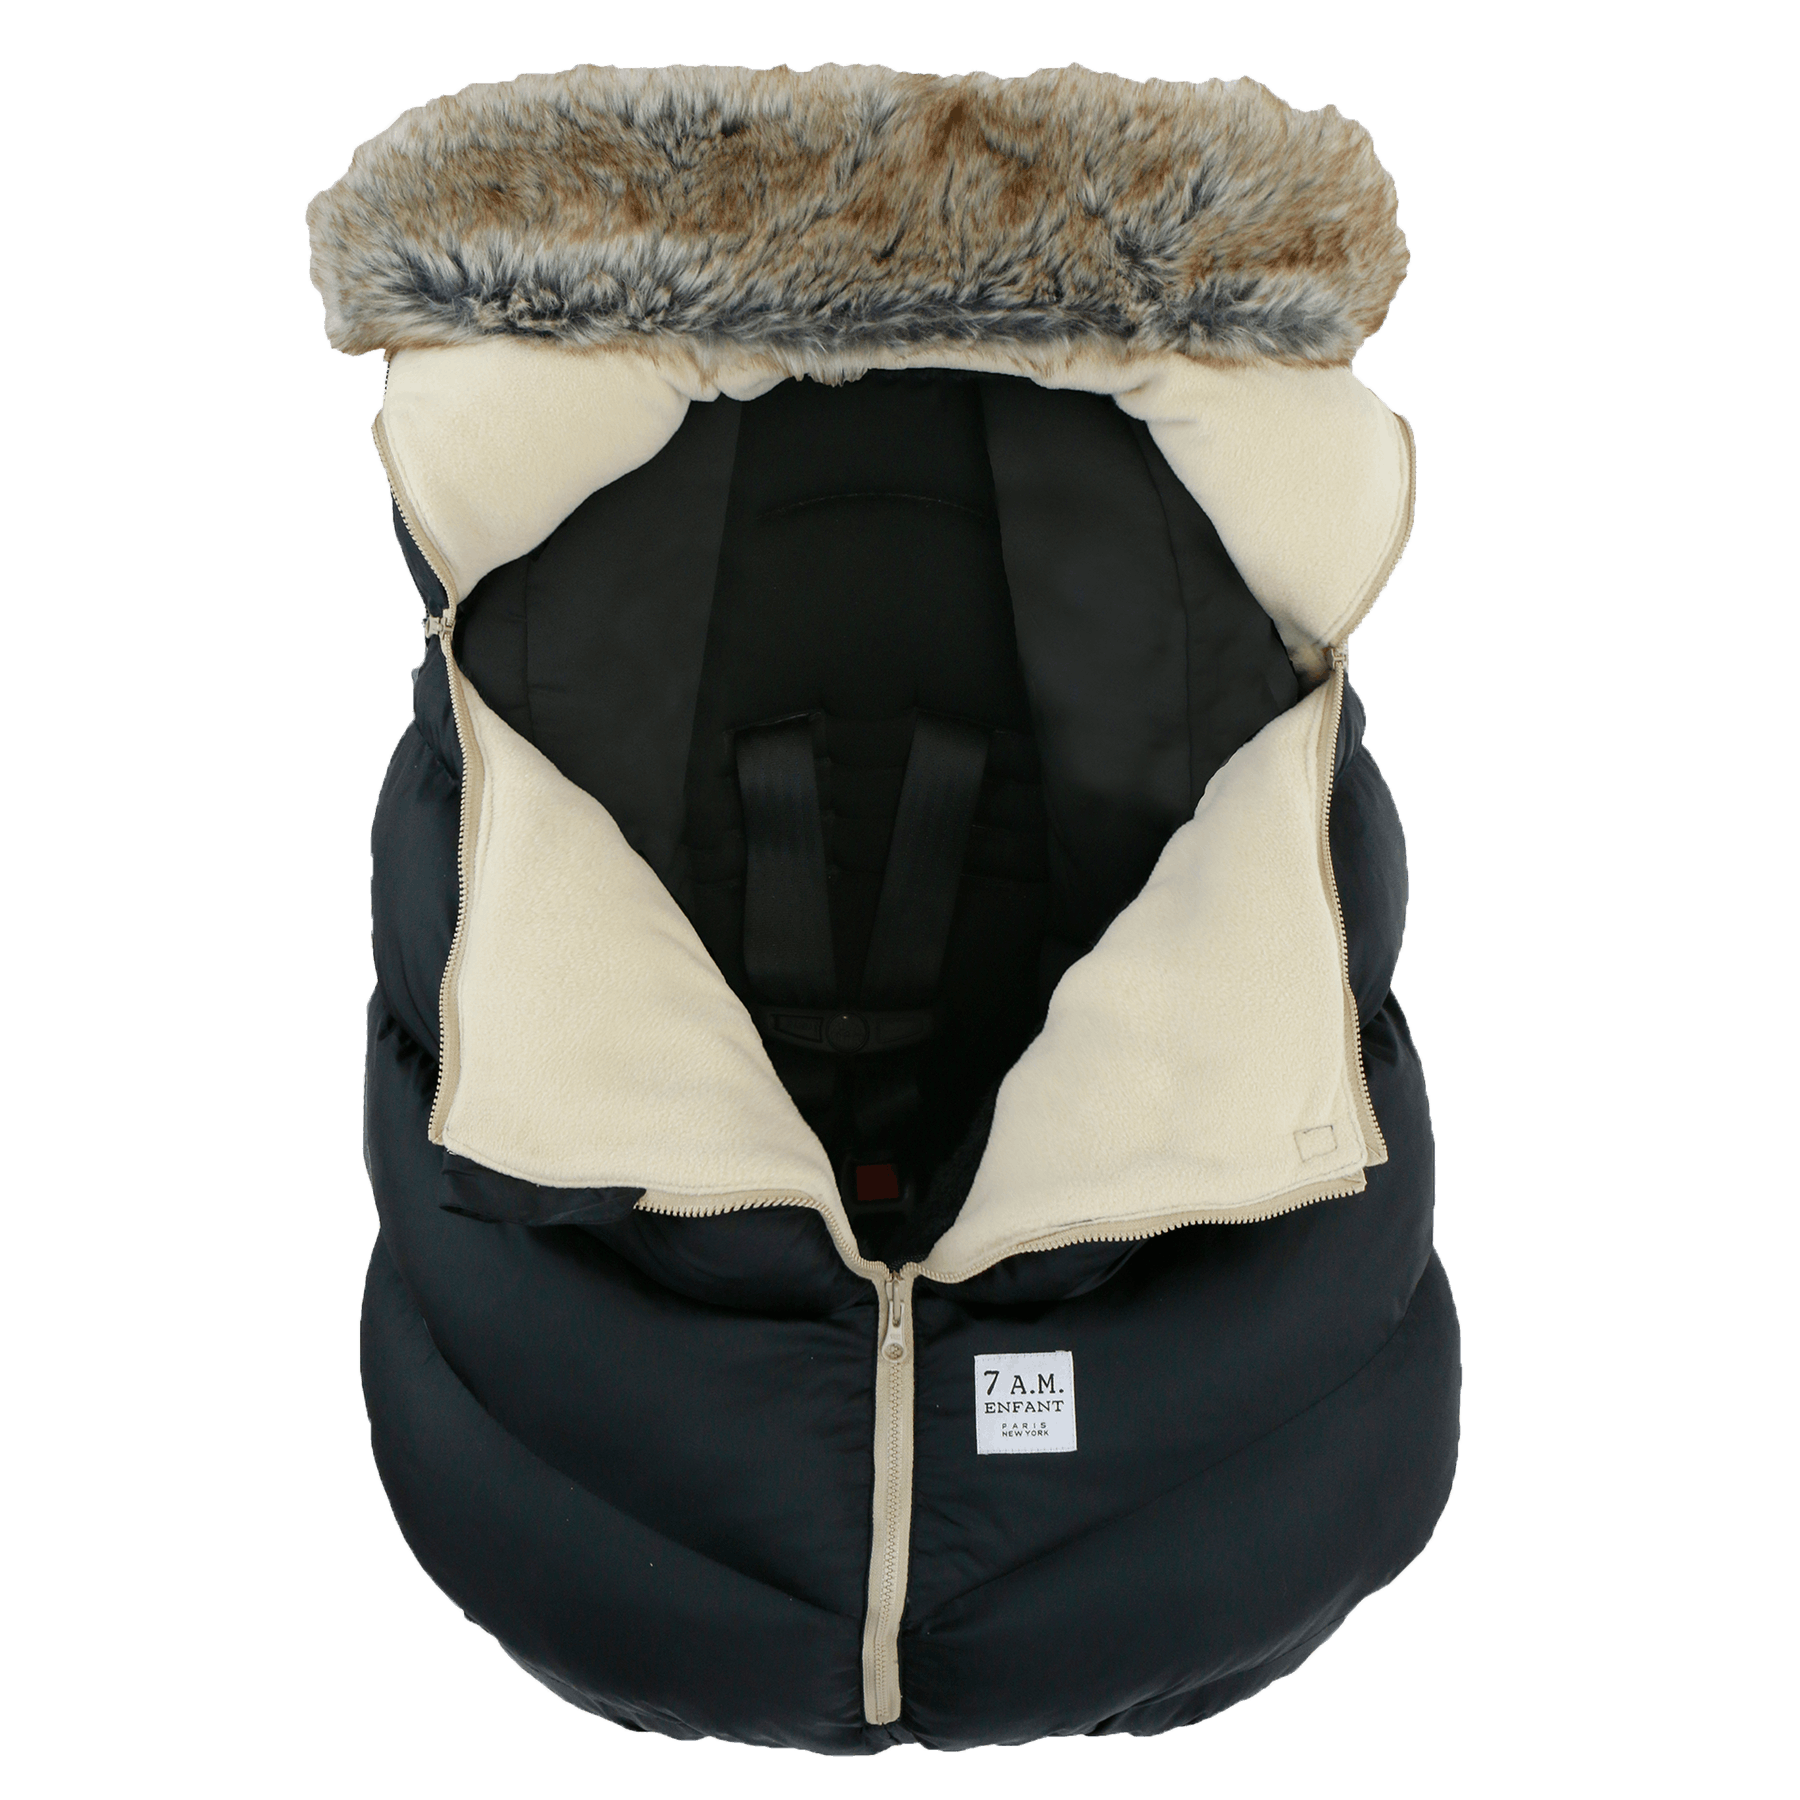 7 AM Enfant Car Seat Cocoon Tundra Collection